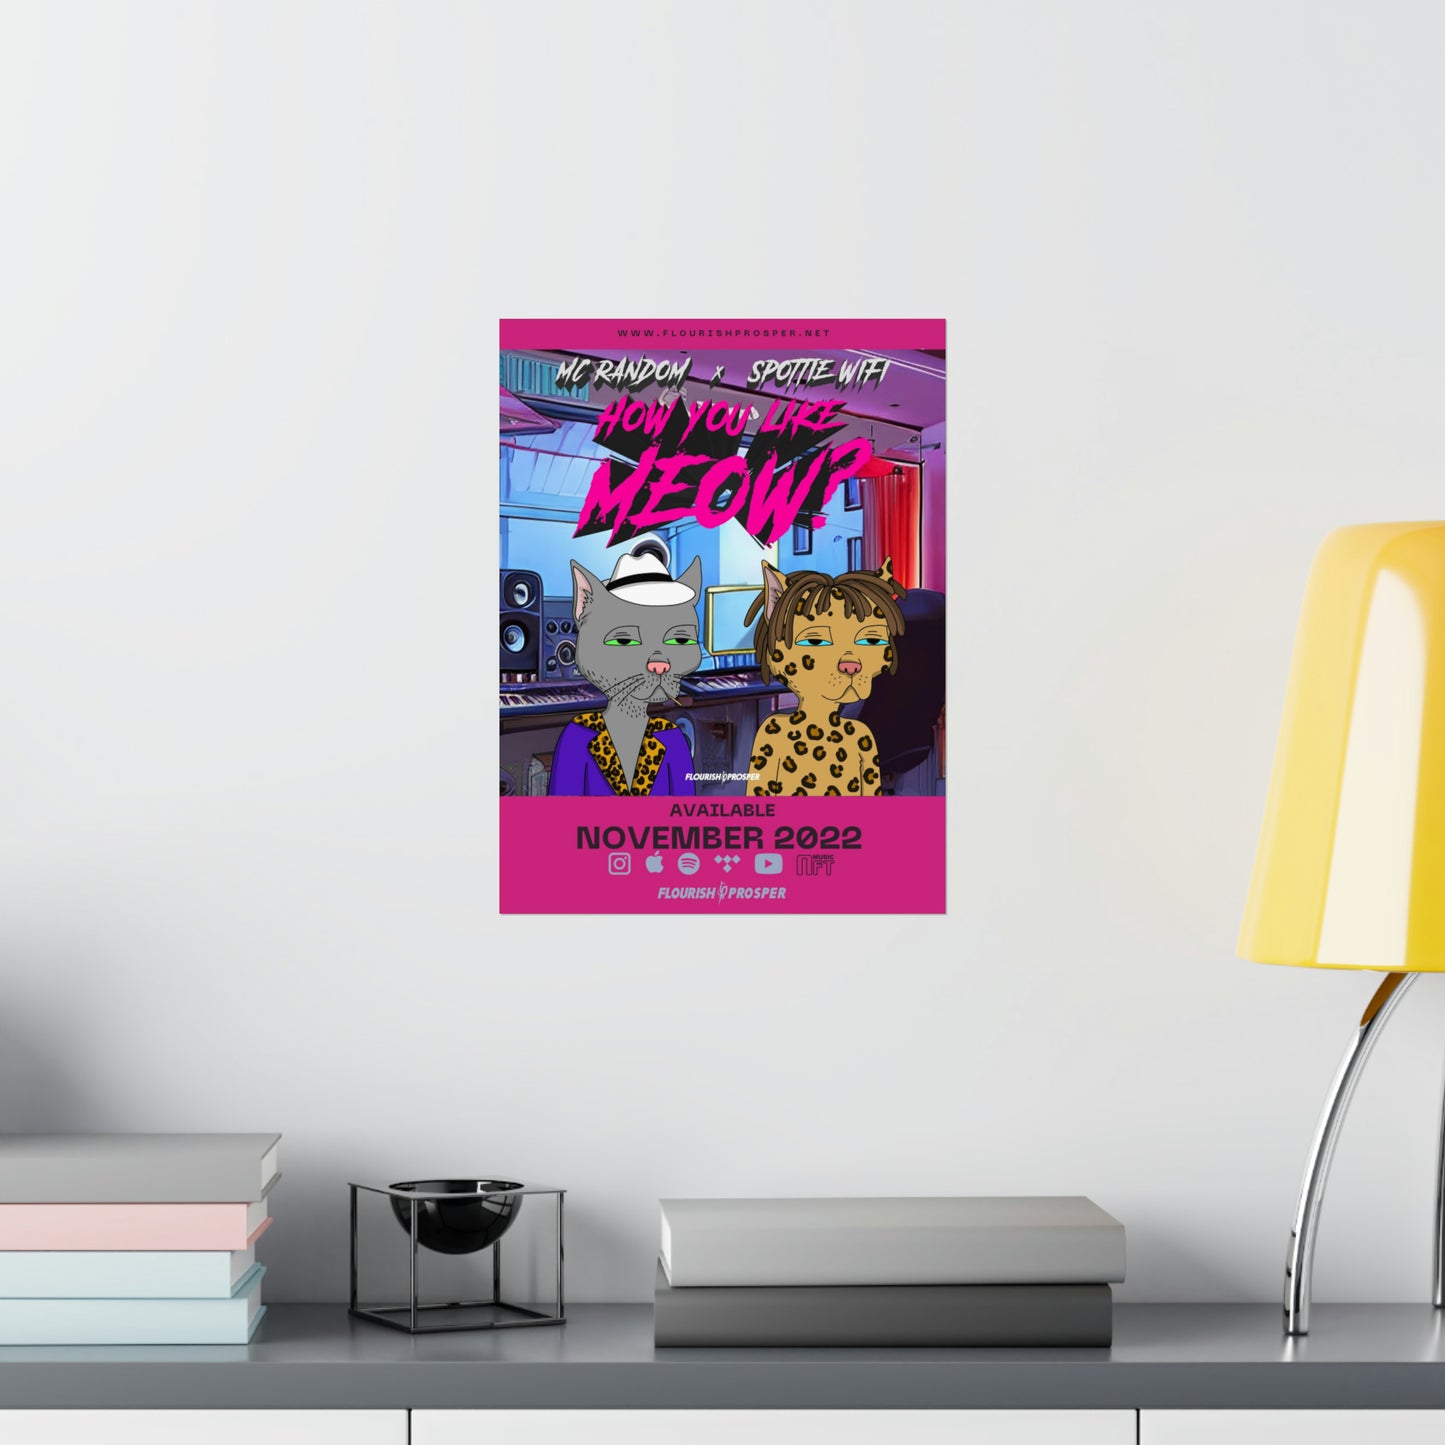 MC Random, Gutter Cat Gang, and Spottie WiFi "How You Like Meow? (Remix)" Matte Vertical Posters